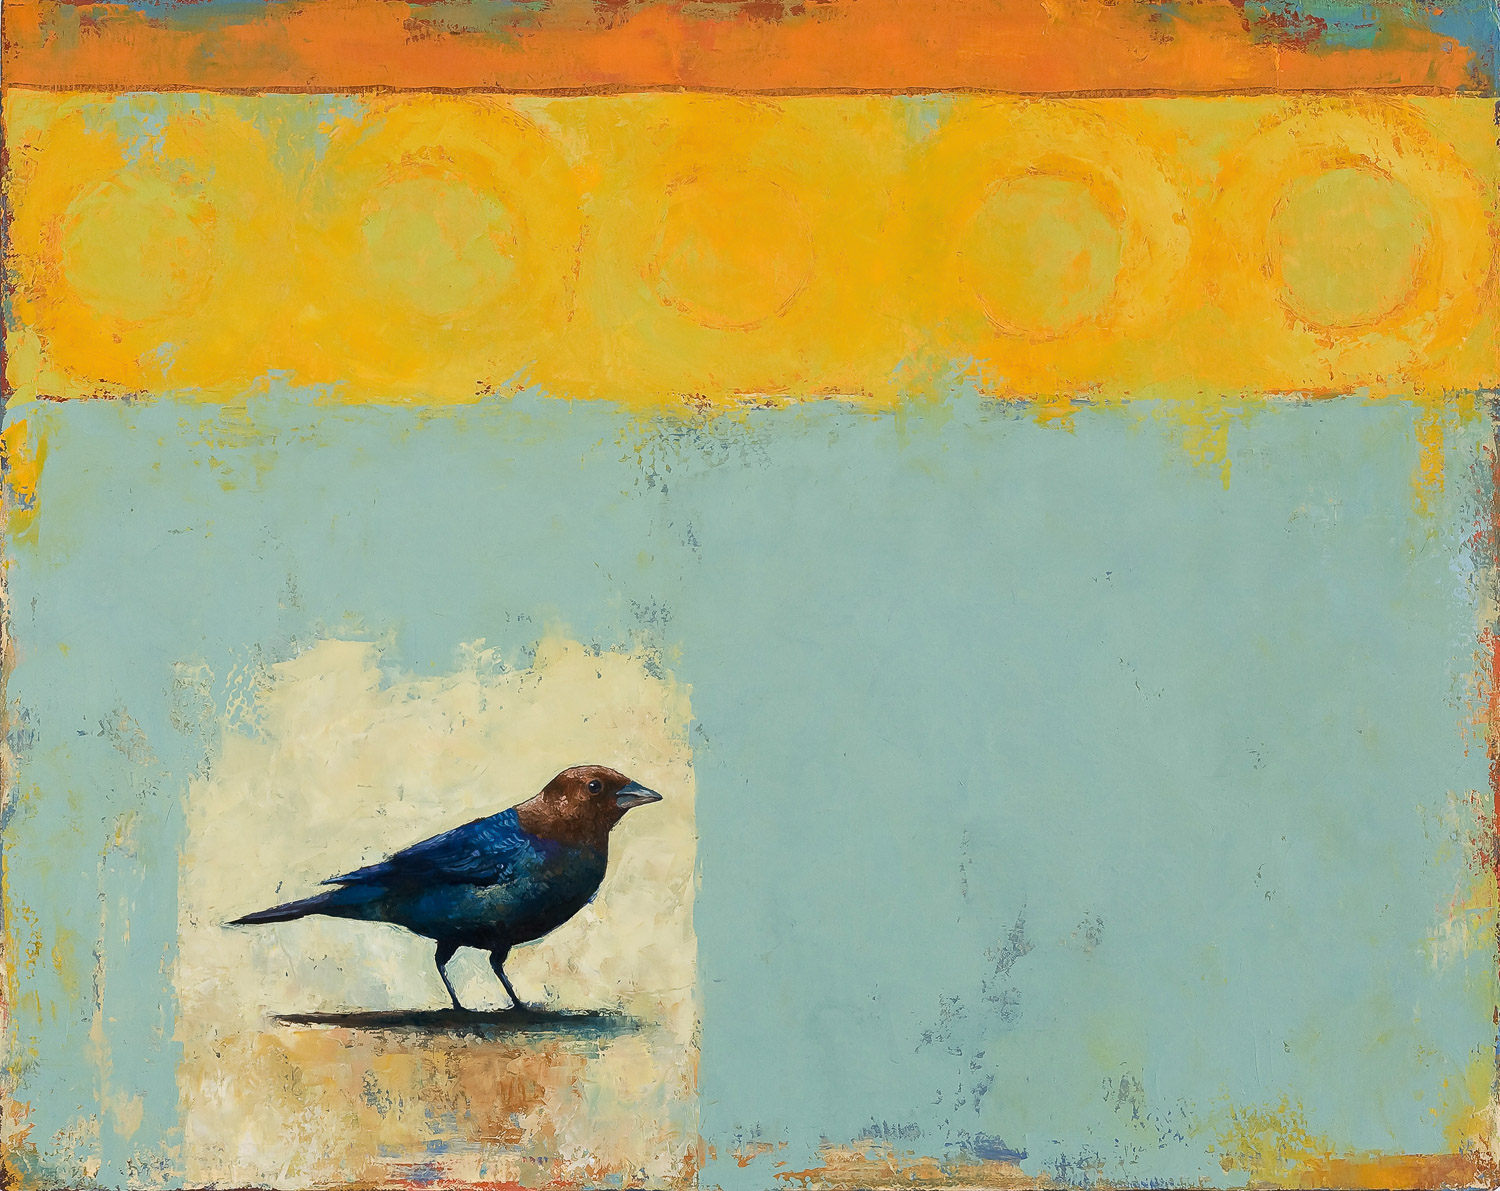    Brown Headed Cowbird   2008 oil on canvas 24 x 30 inches  Private collection 